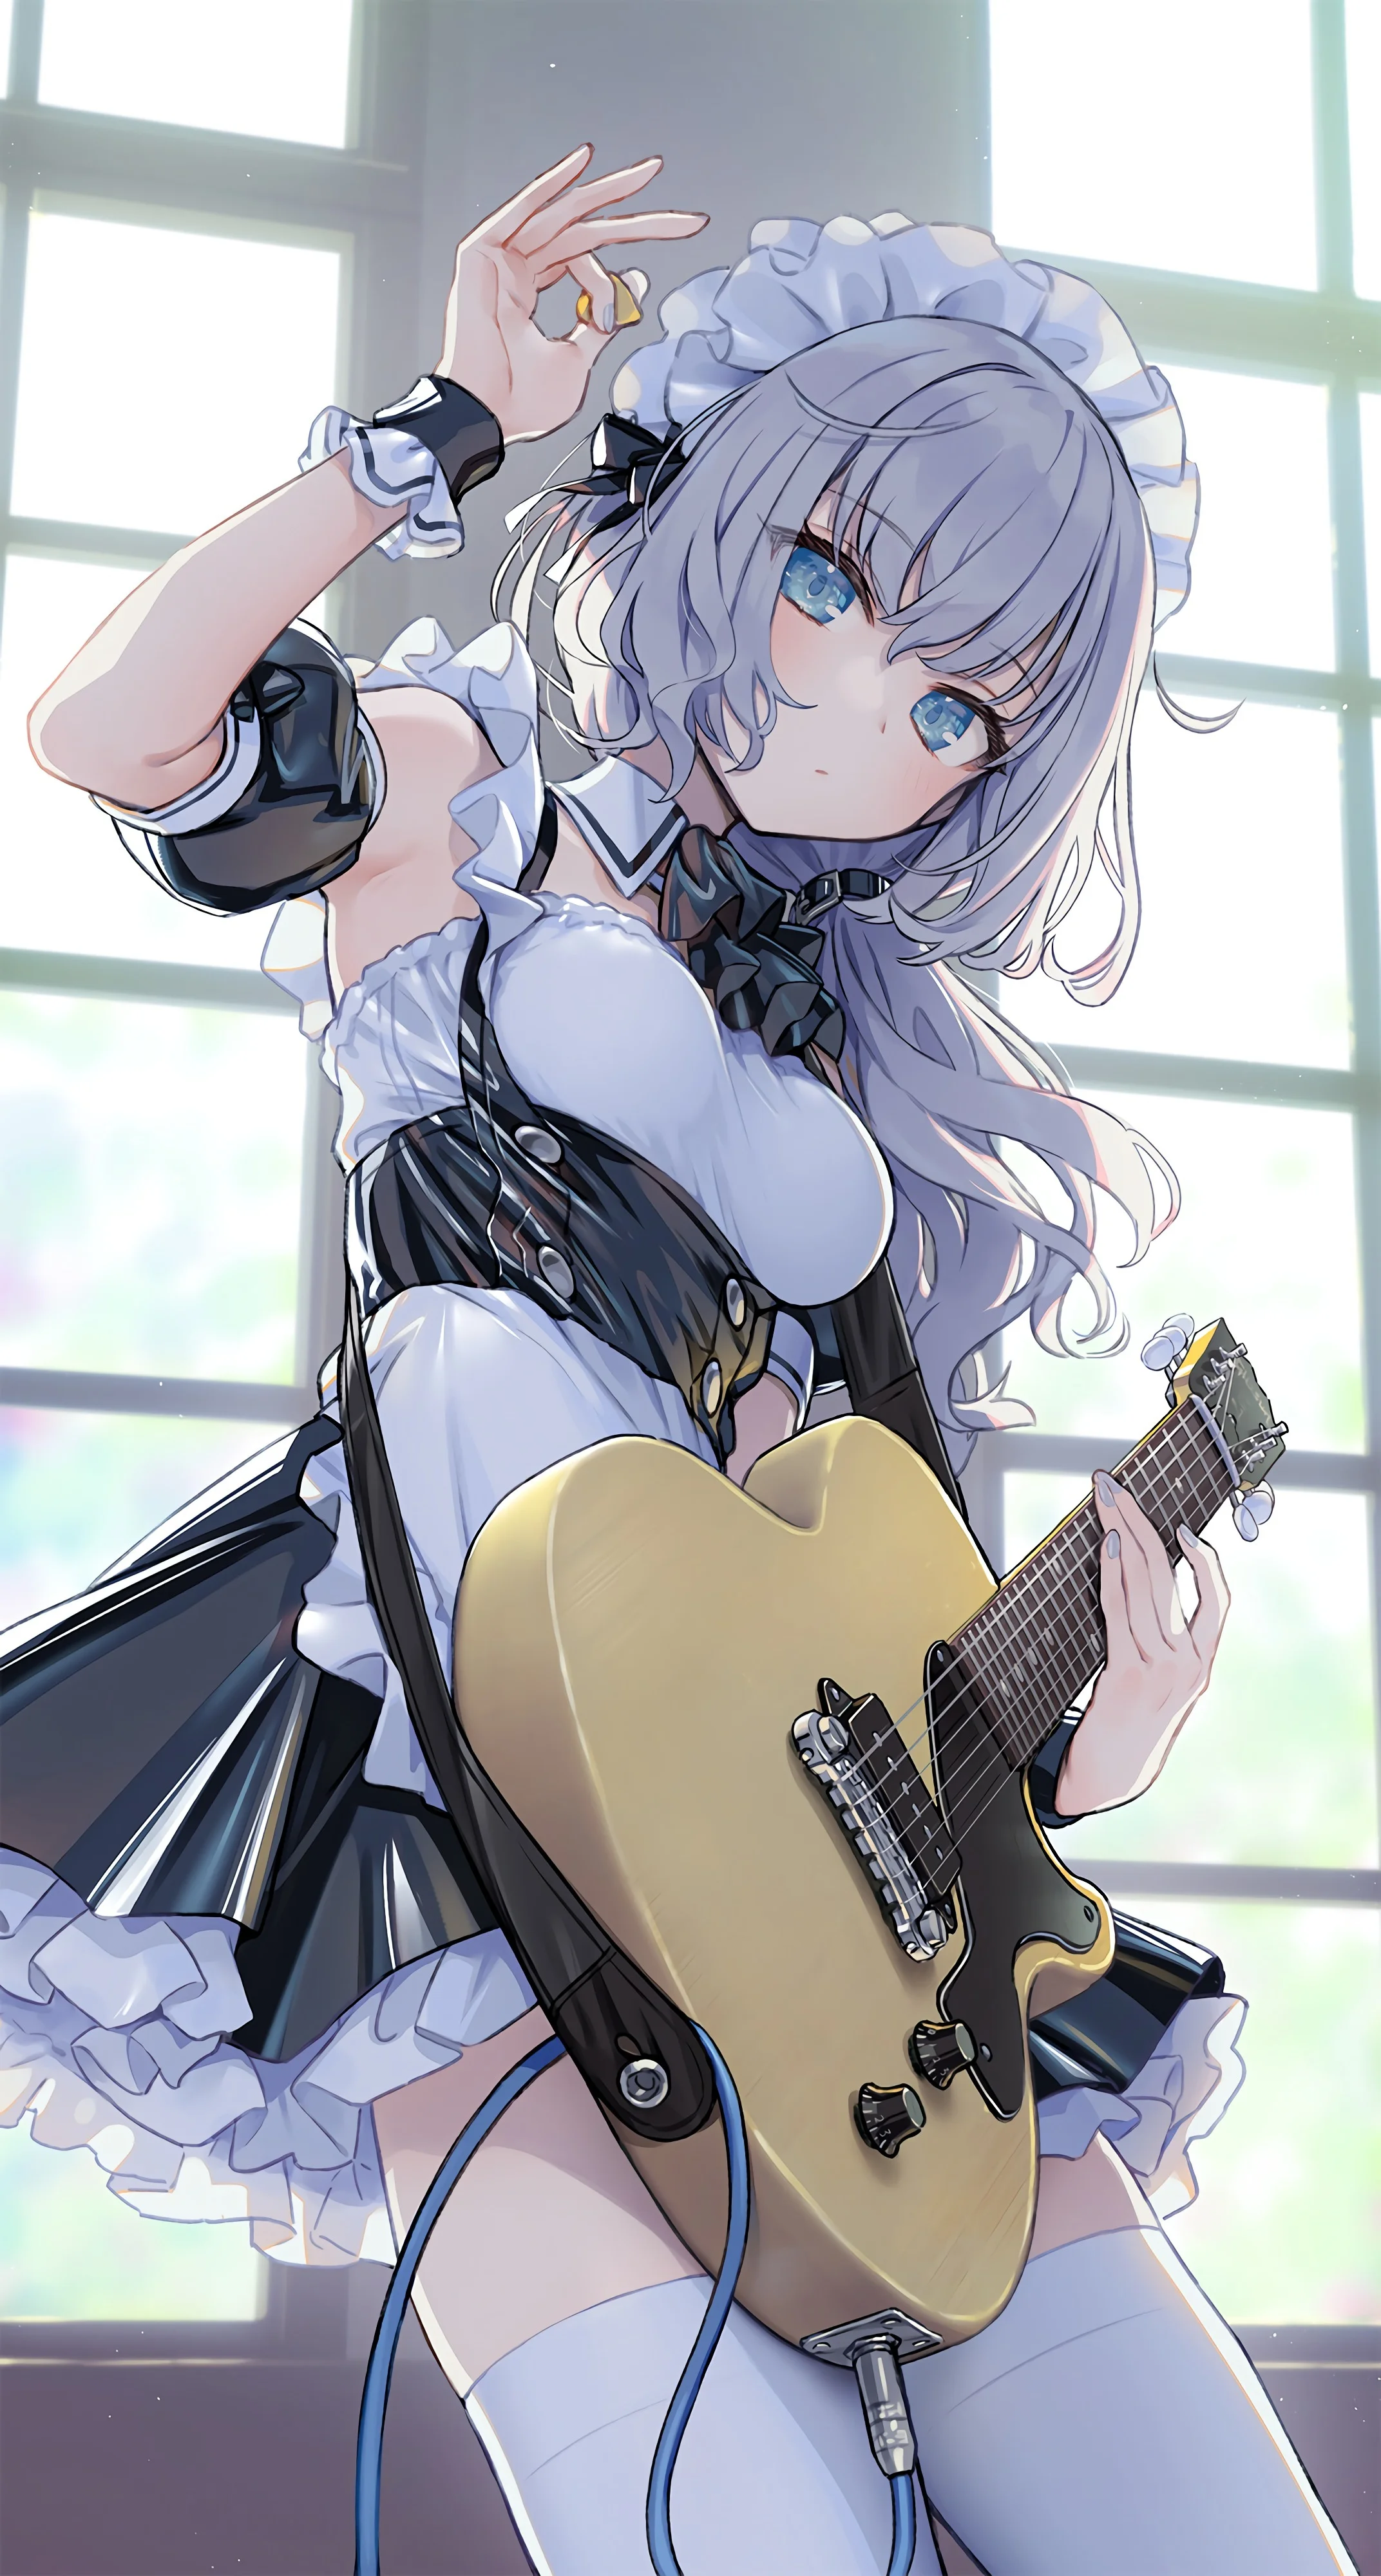 Anime 2144x4000 anime anime girls maid guitar musical instrument maid outfit stockings